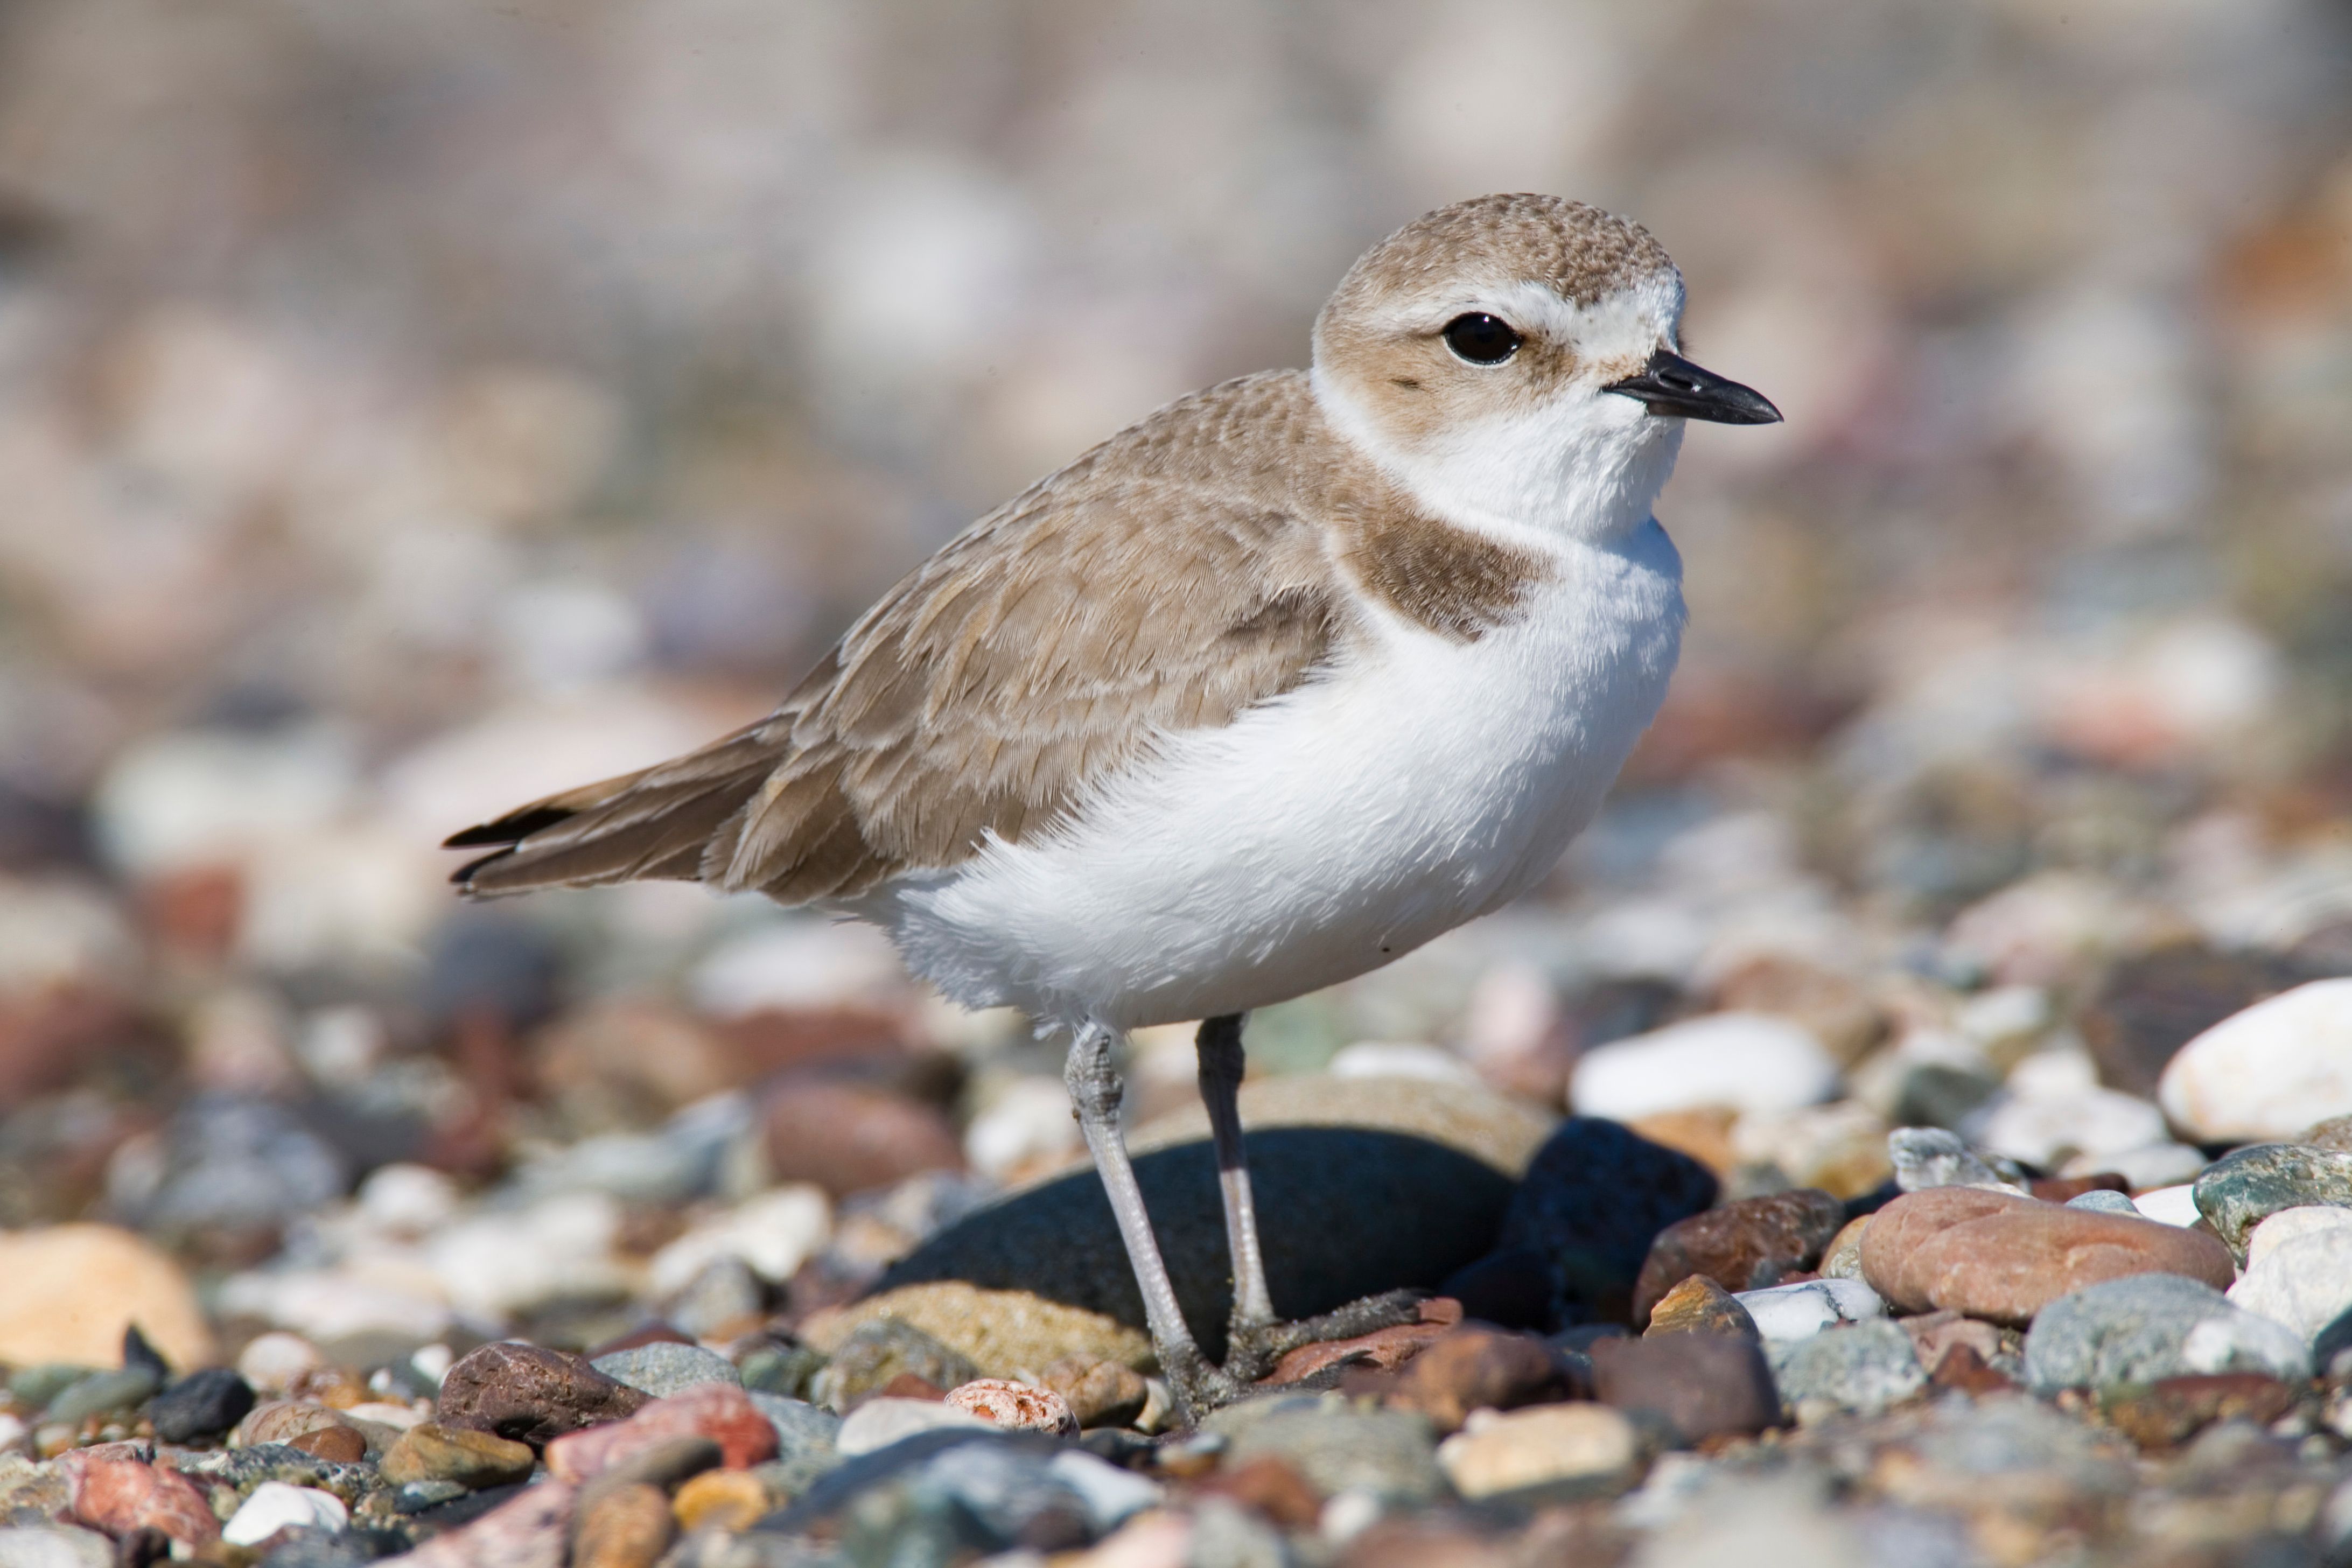 Kentish Plover photo and wallpaper. Collection of the Kentish